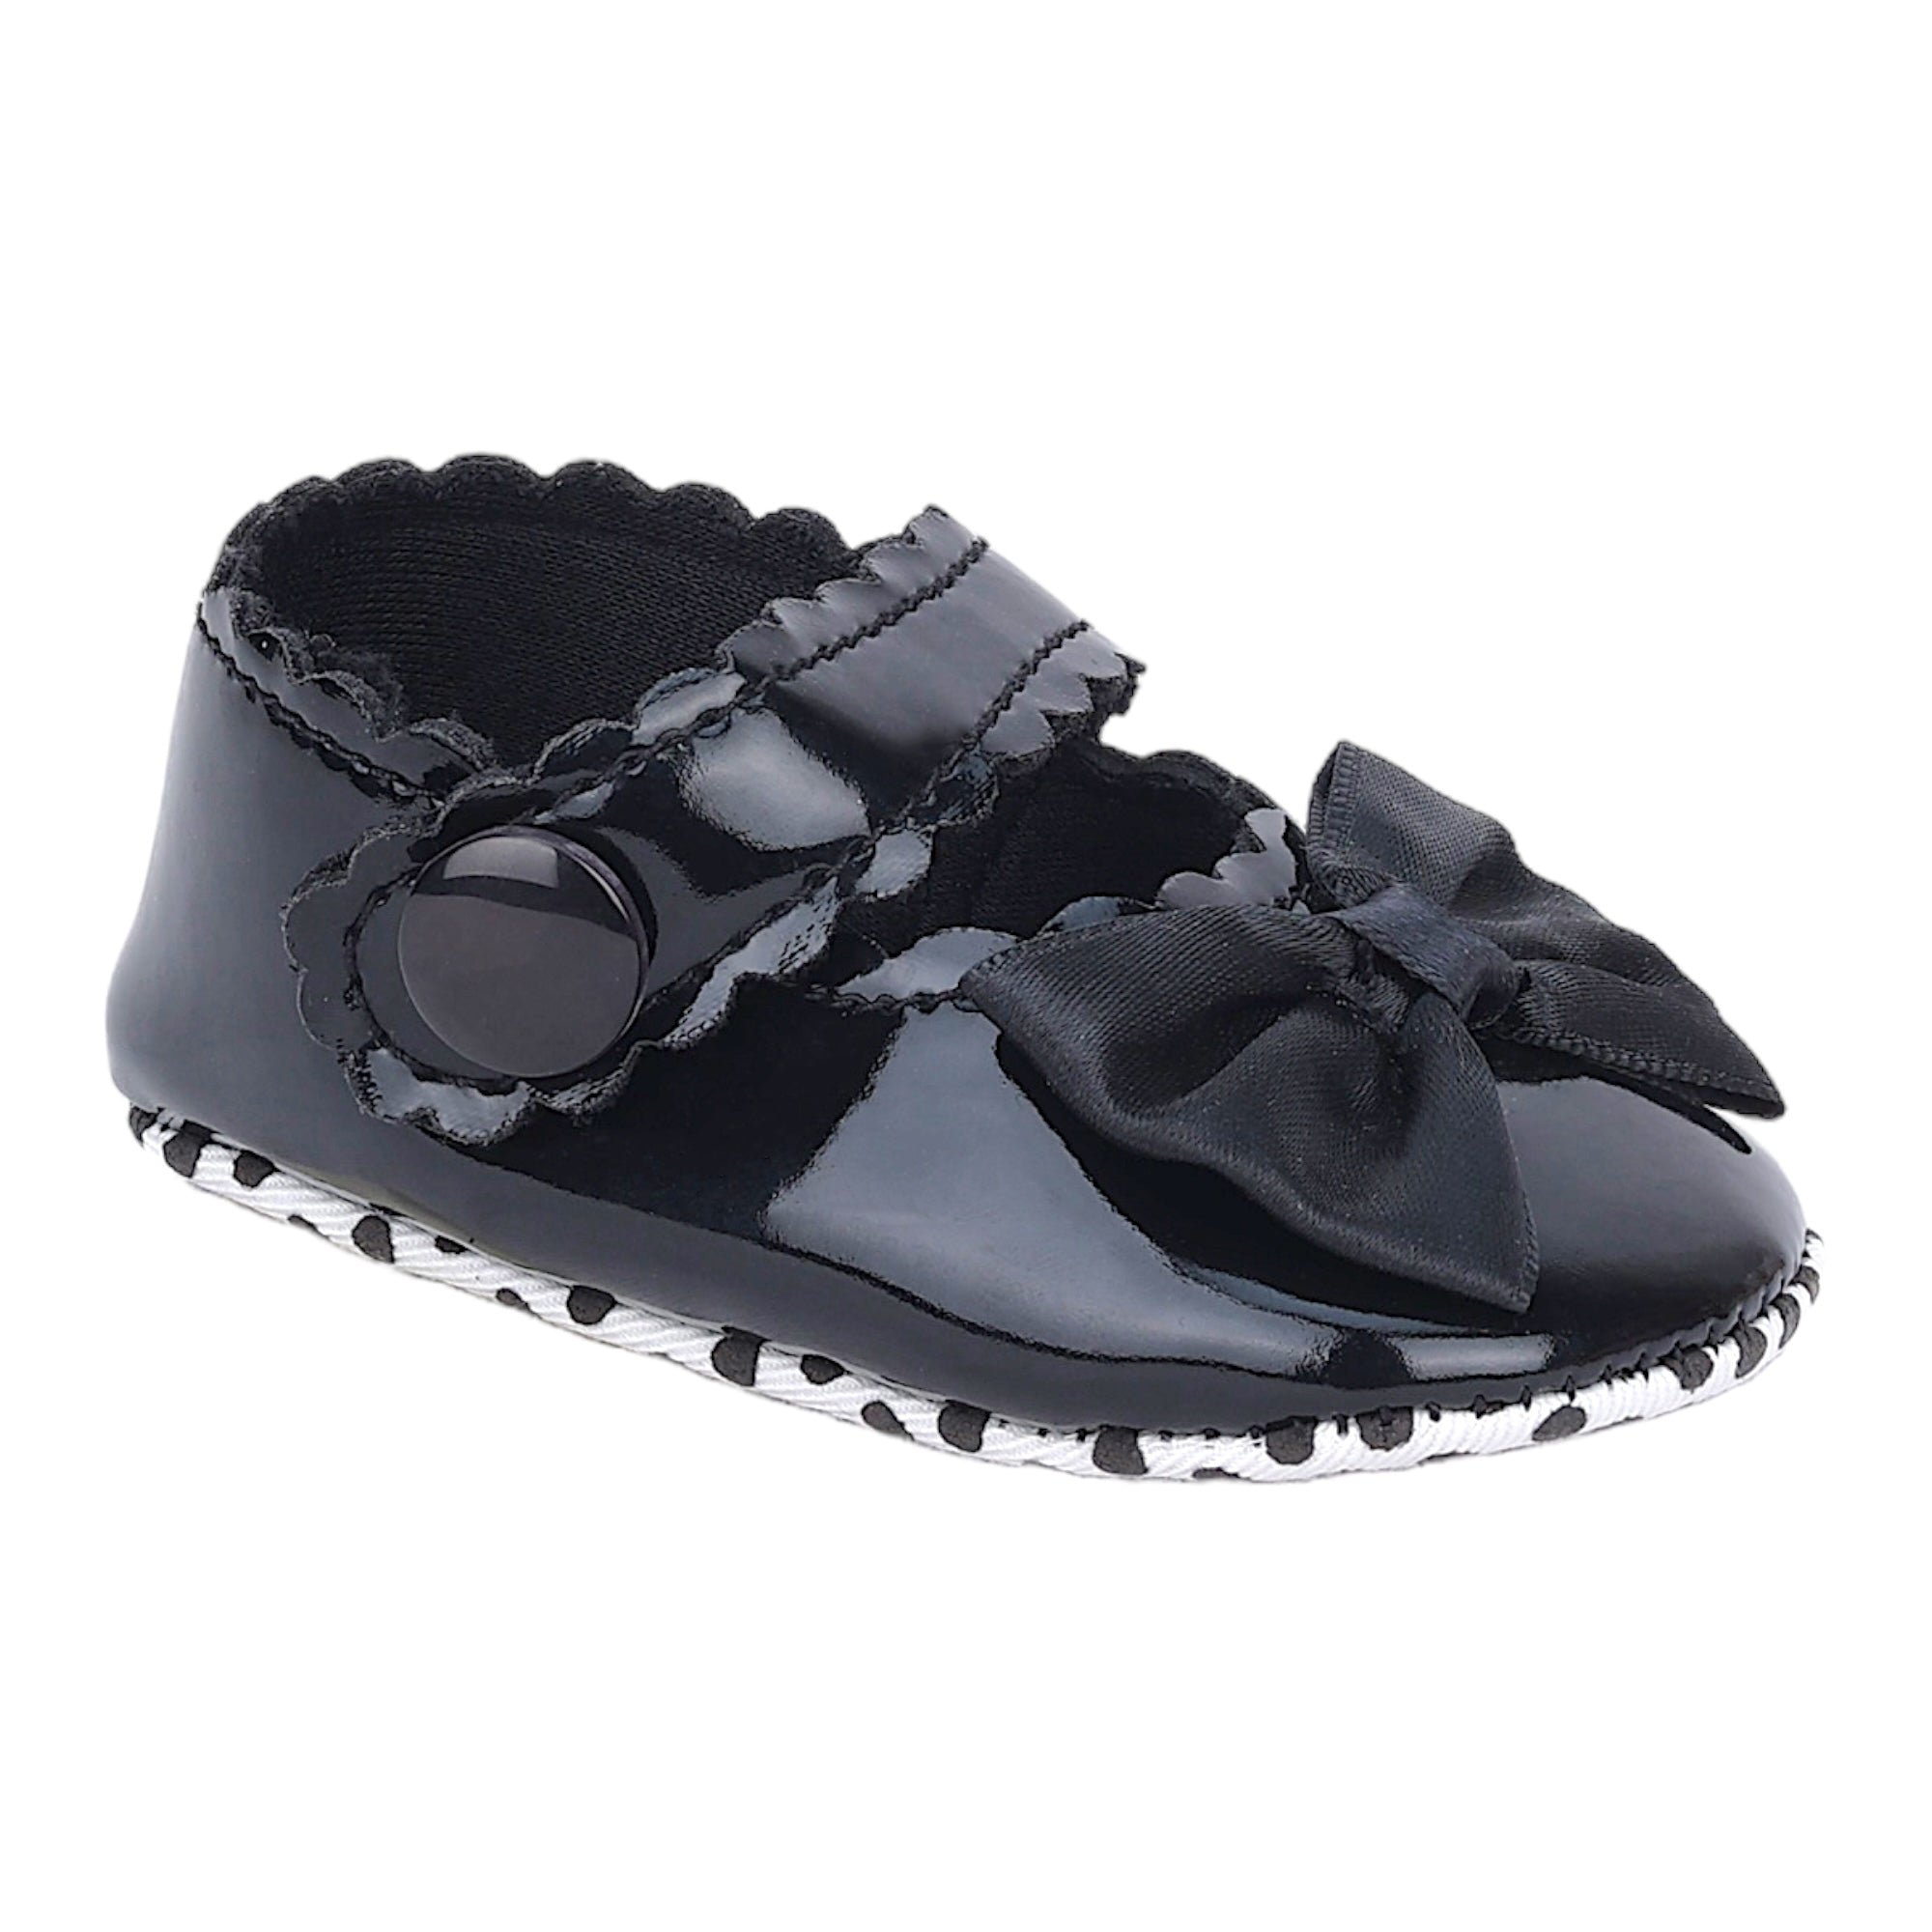 Baby Moo Bow Velcro Strap Patent Leather Anti-Skid Ballerina Booties - Black